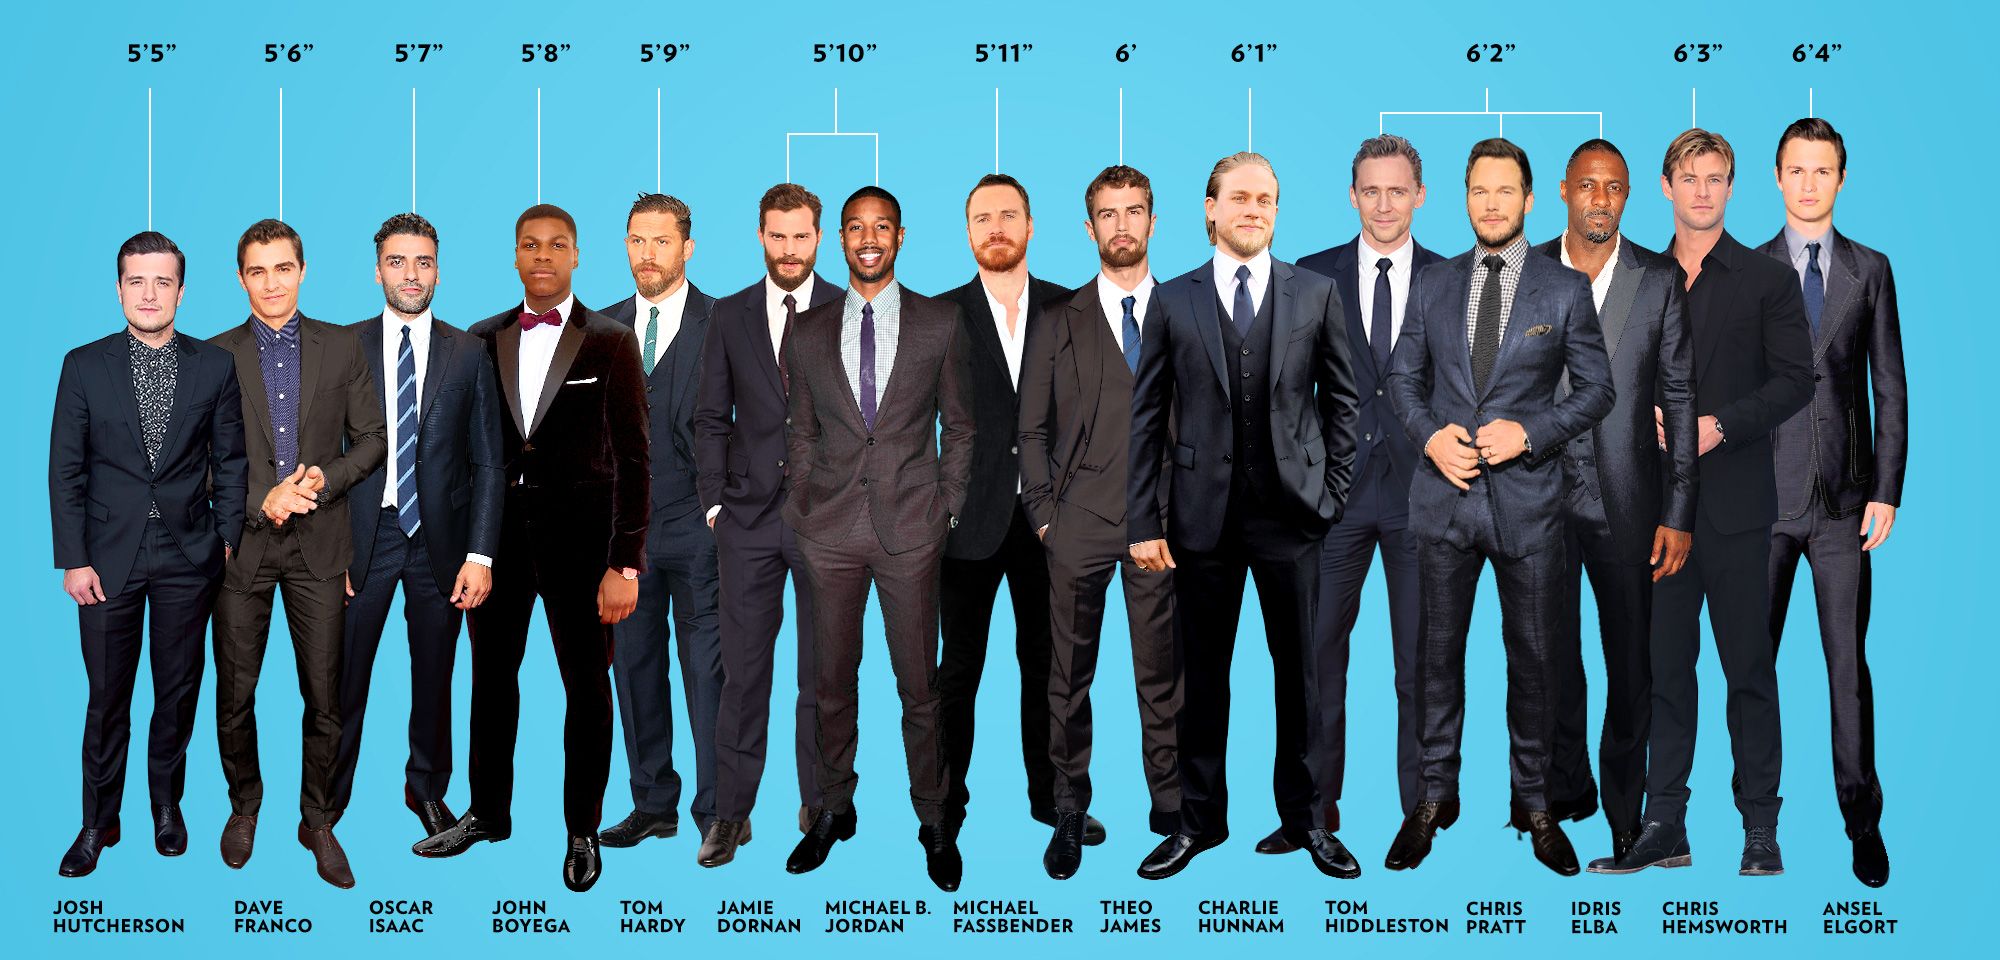 How Tall Are the New Movie Heartthrobs? Vulture